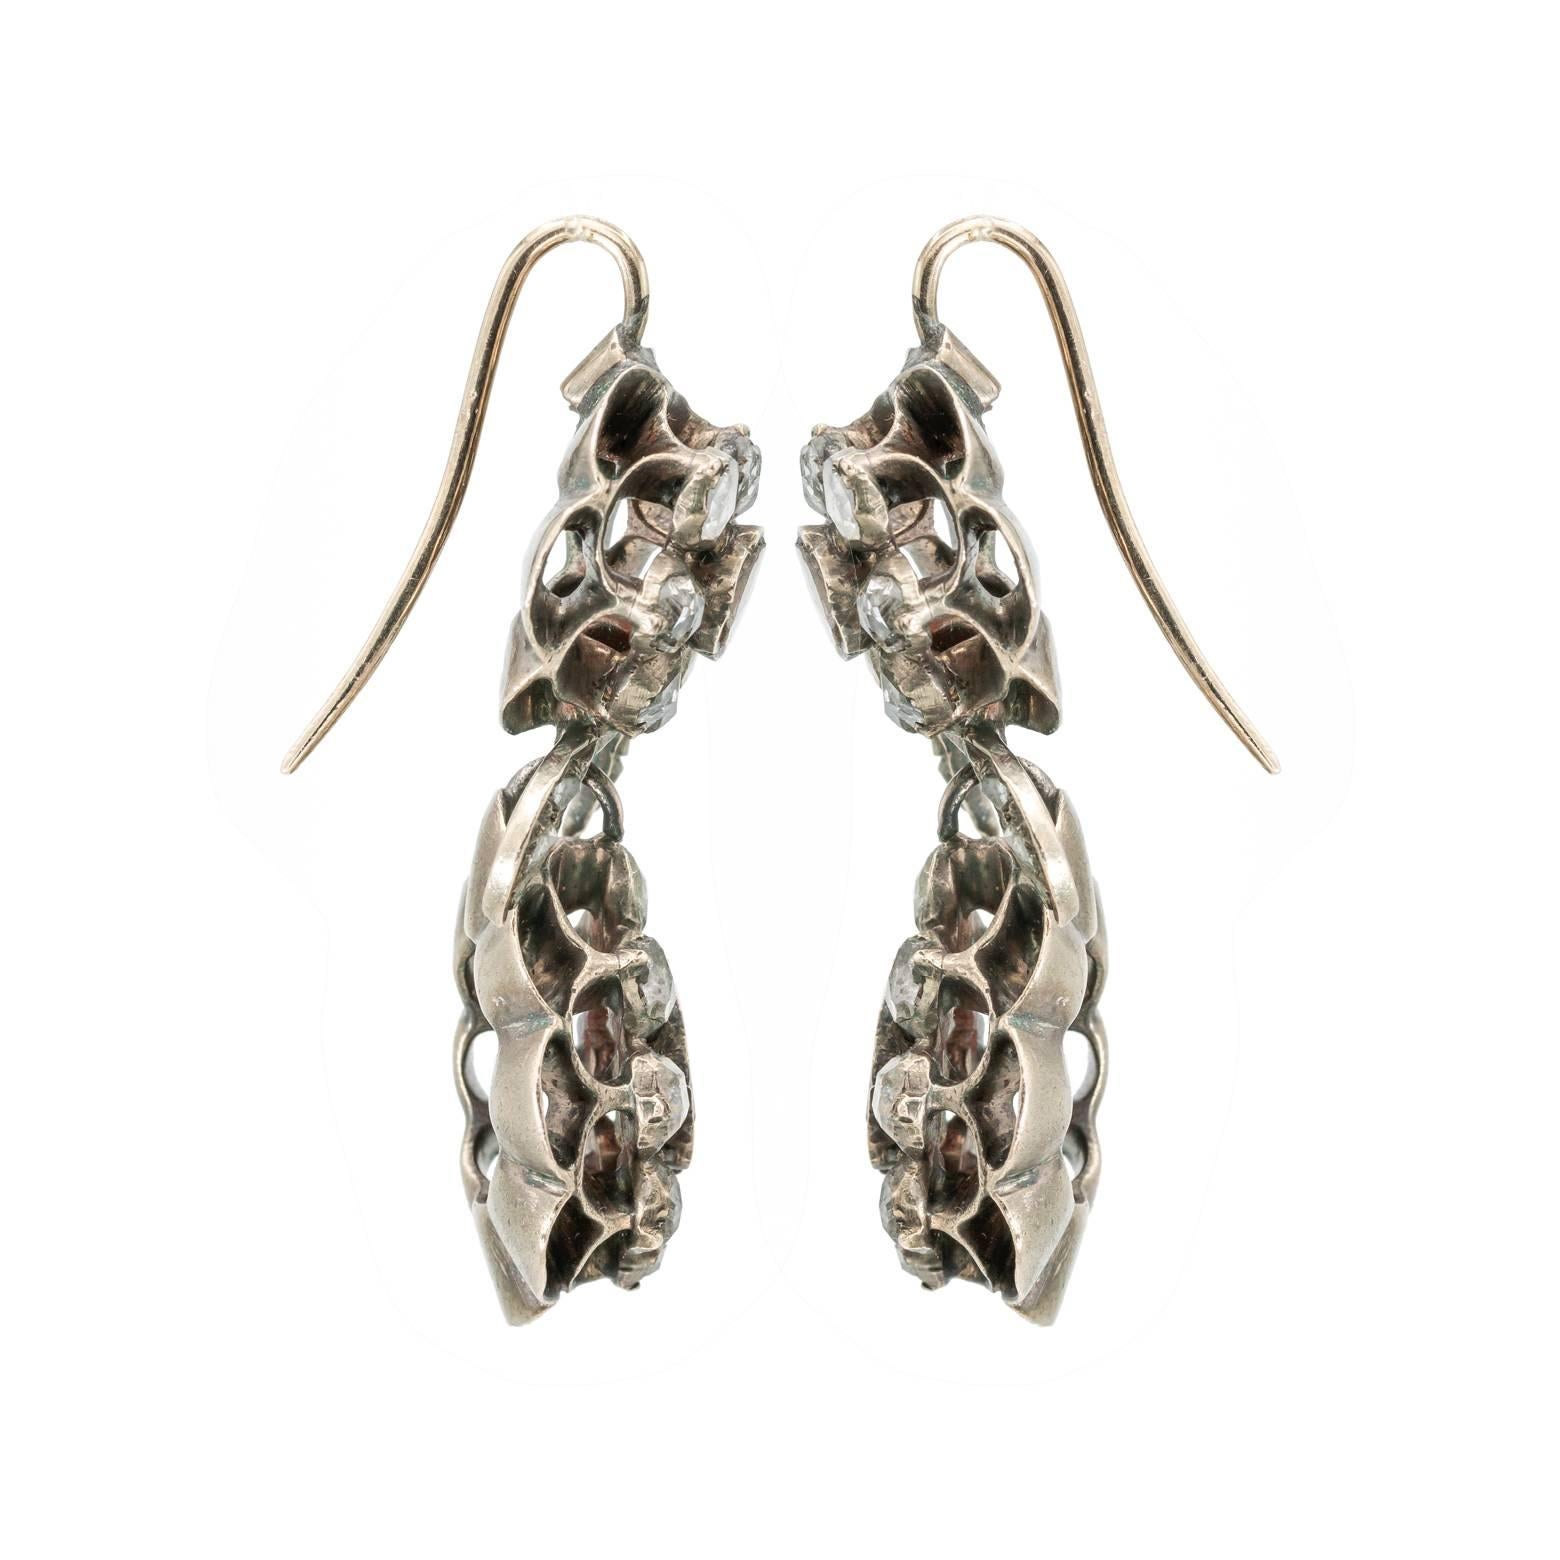 Georgian Pendeloque Old Rose Cut Diamond and Silver Floral Drop Earrings, Boho style.
These antique Pendeloque stunning old rose cut diamond earrings are set in sterling silver from the 1820's. Stylized floral and foliate design, the style is from